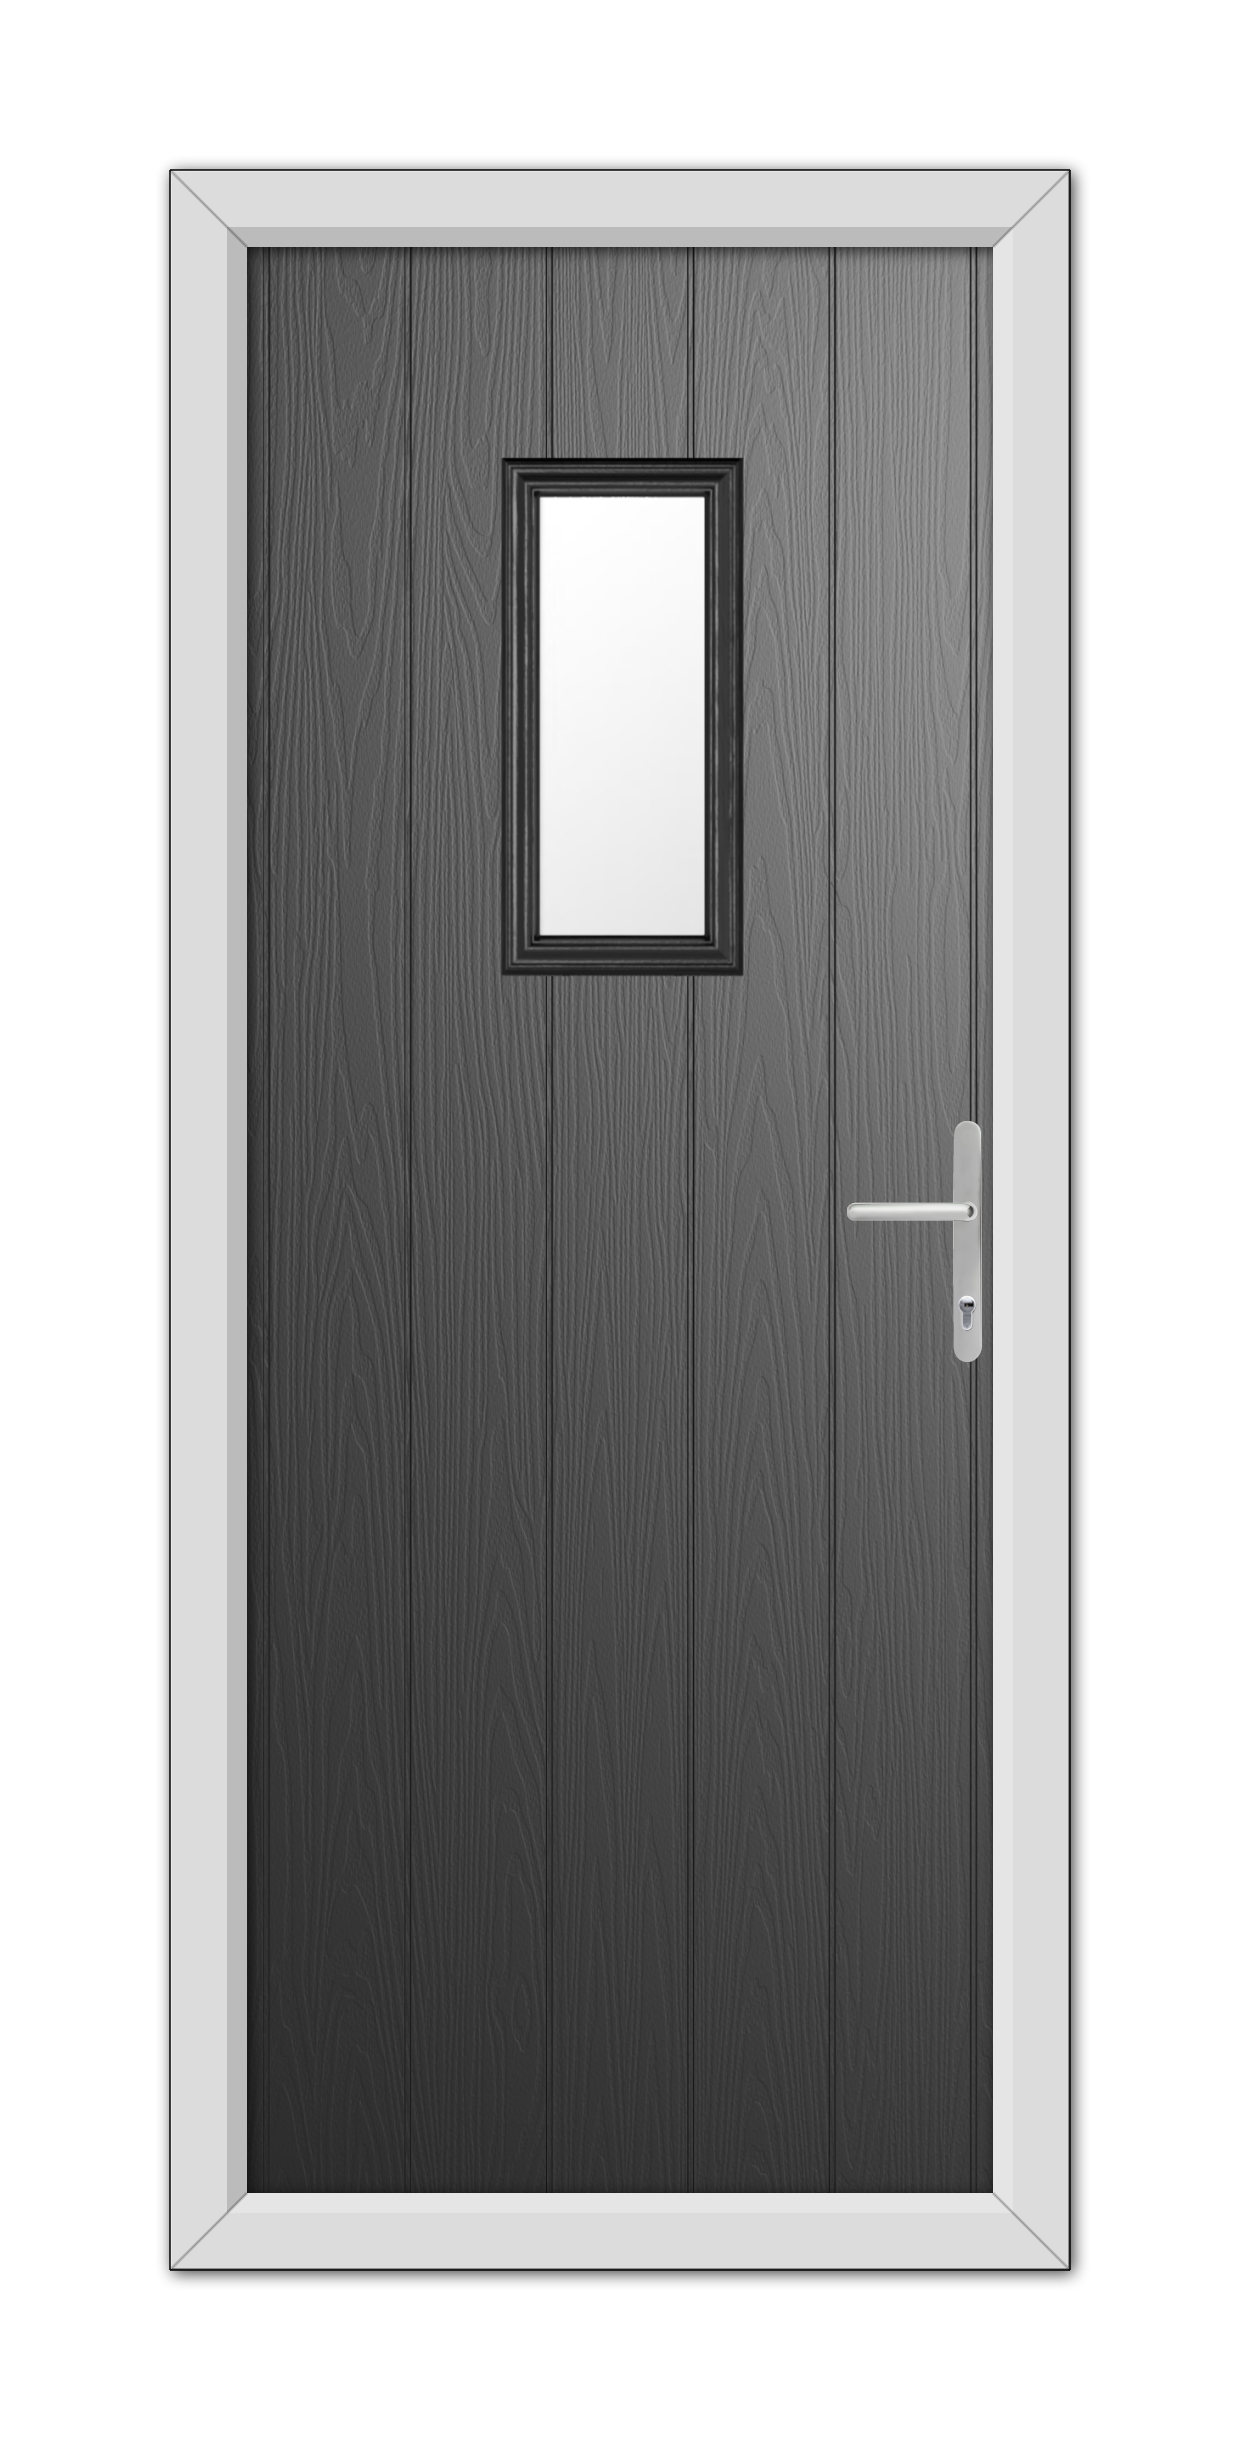 A modern Black Somerset Composite Door 48mm Timber Core with a white frame, featuring a small square window and a metal handle on the right side.